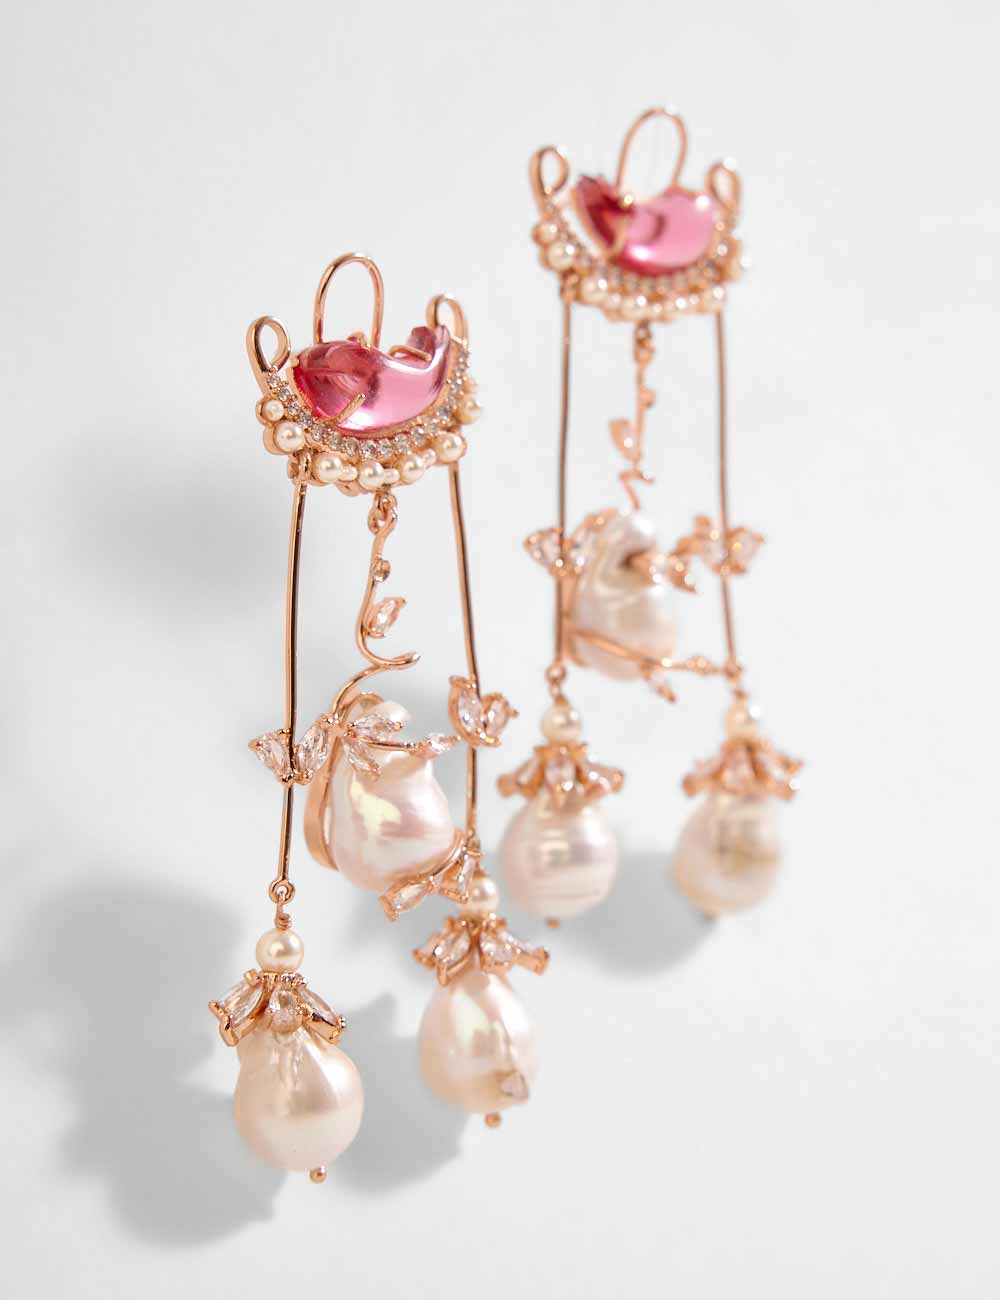 Blush pink wedding earrings | Shop Beautiful Bridal Jewelry and Gifts